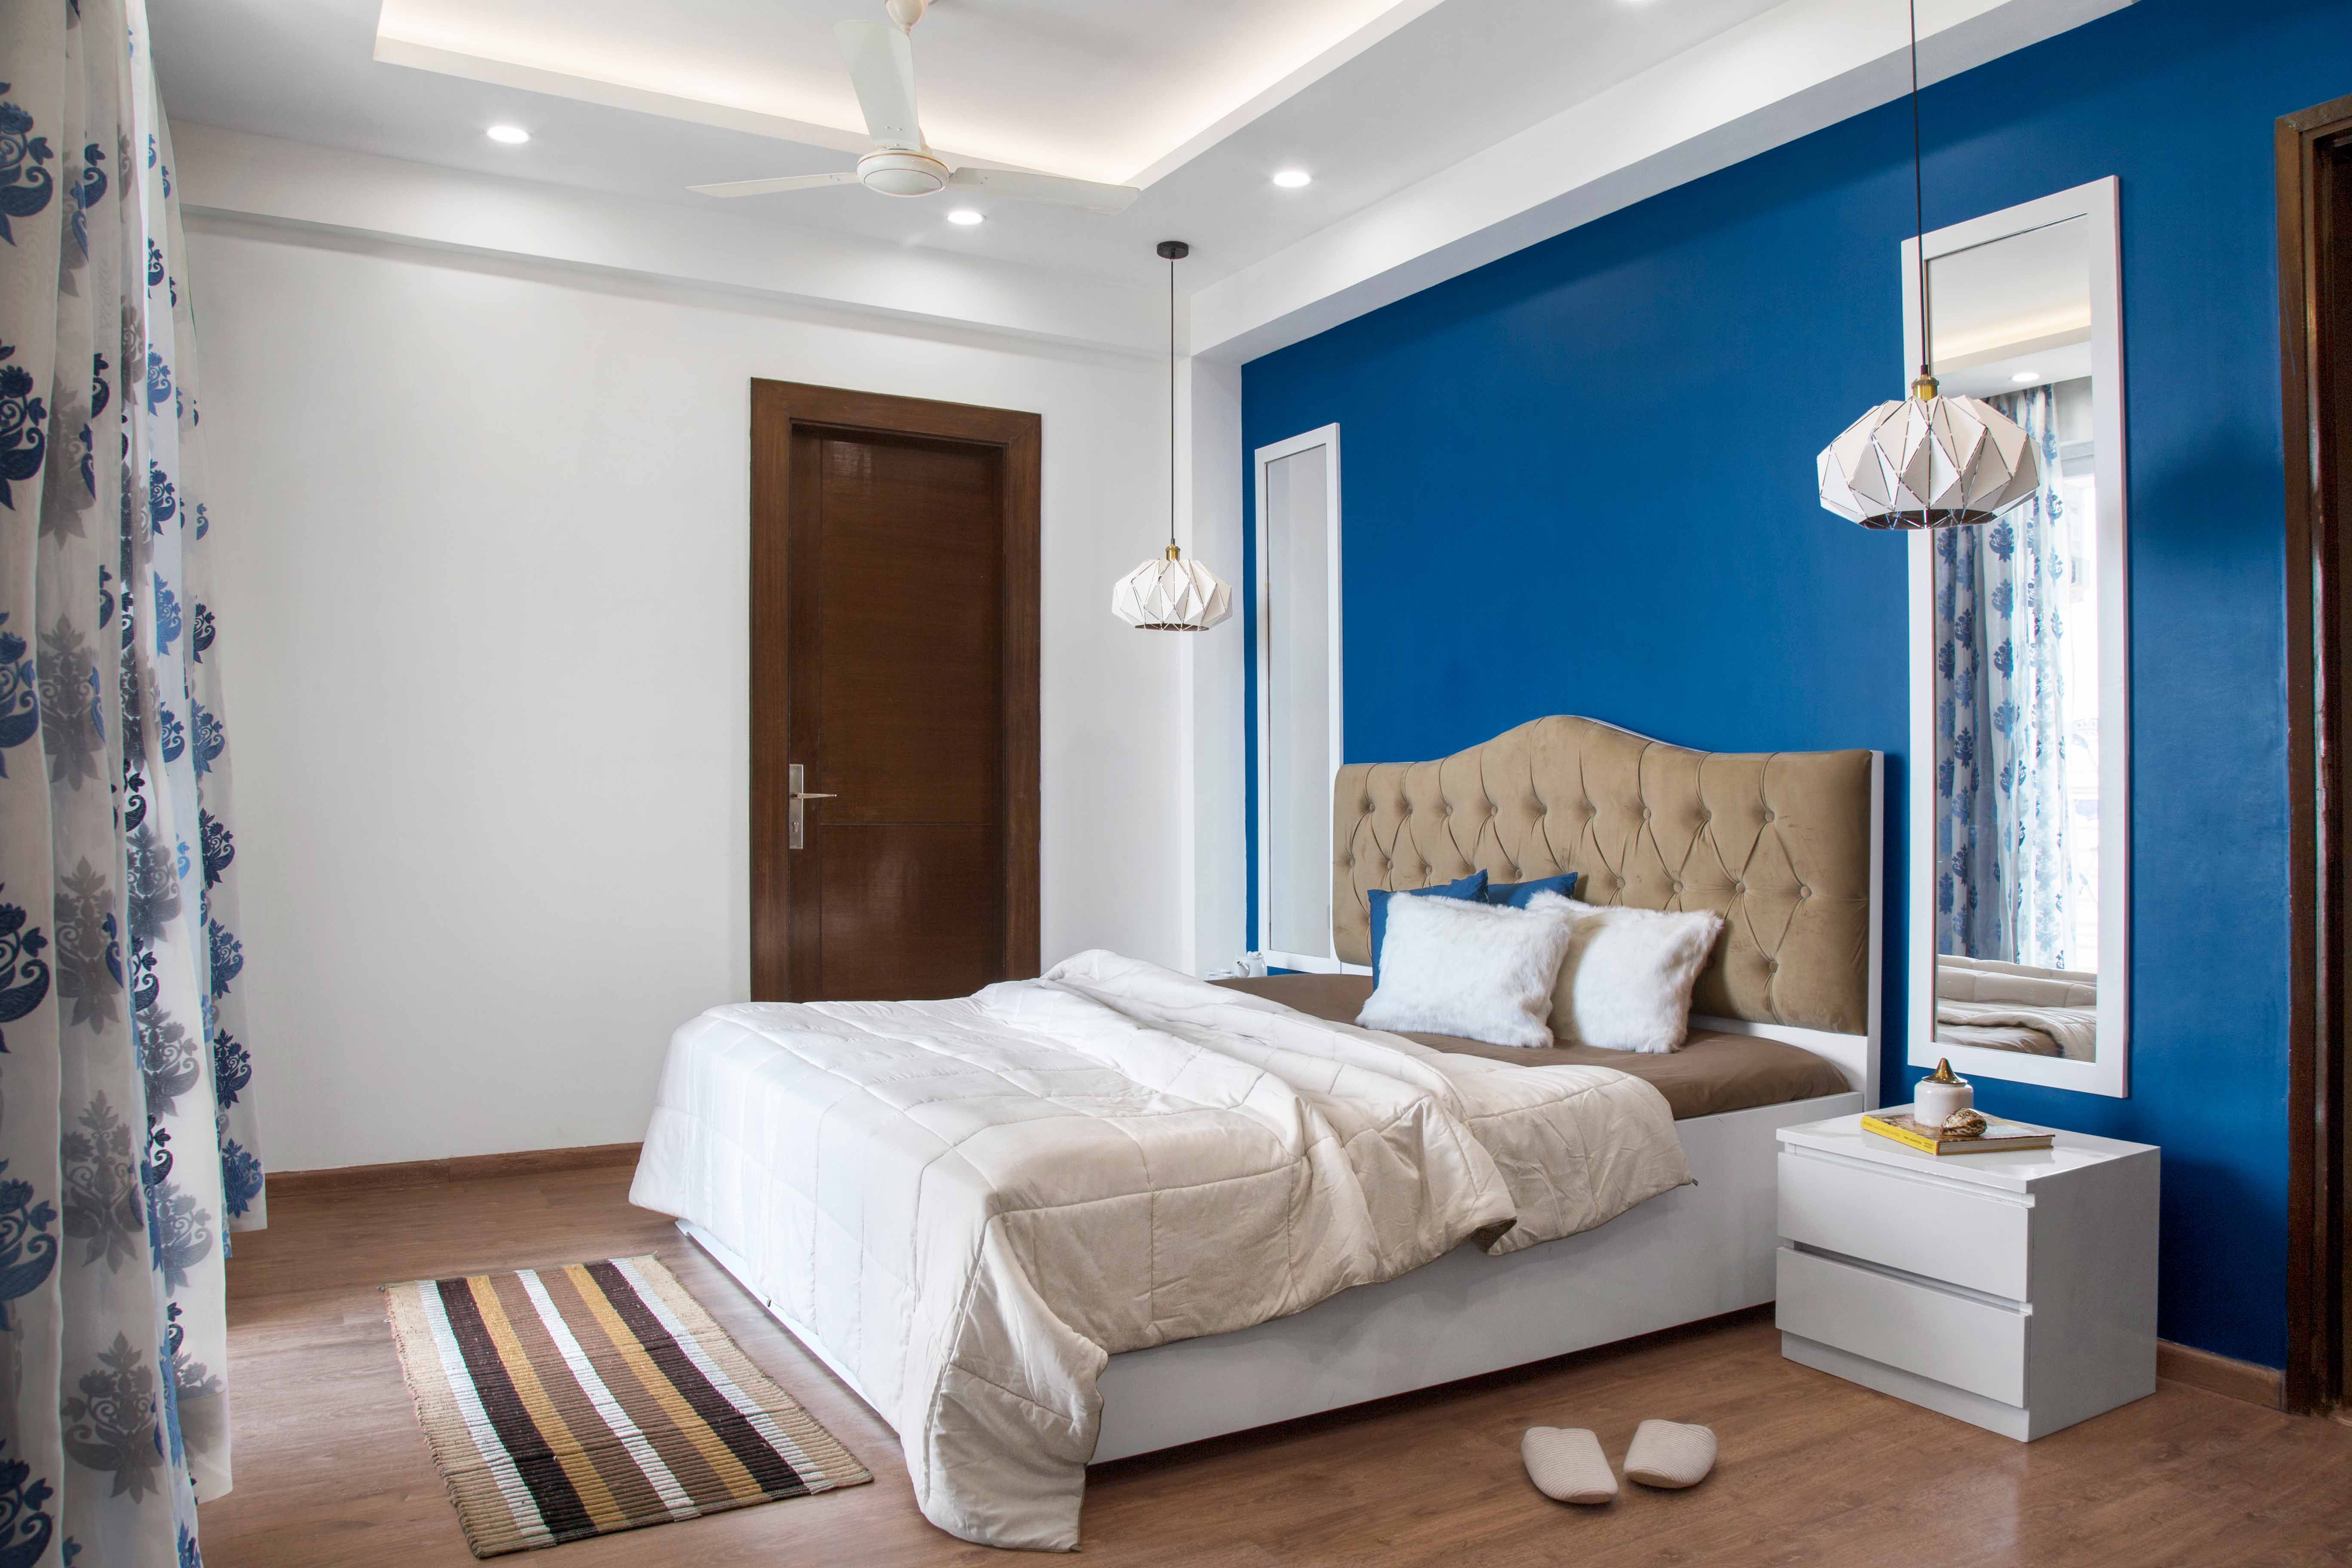 Classic Guest Room Design With Blue Accent Wall